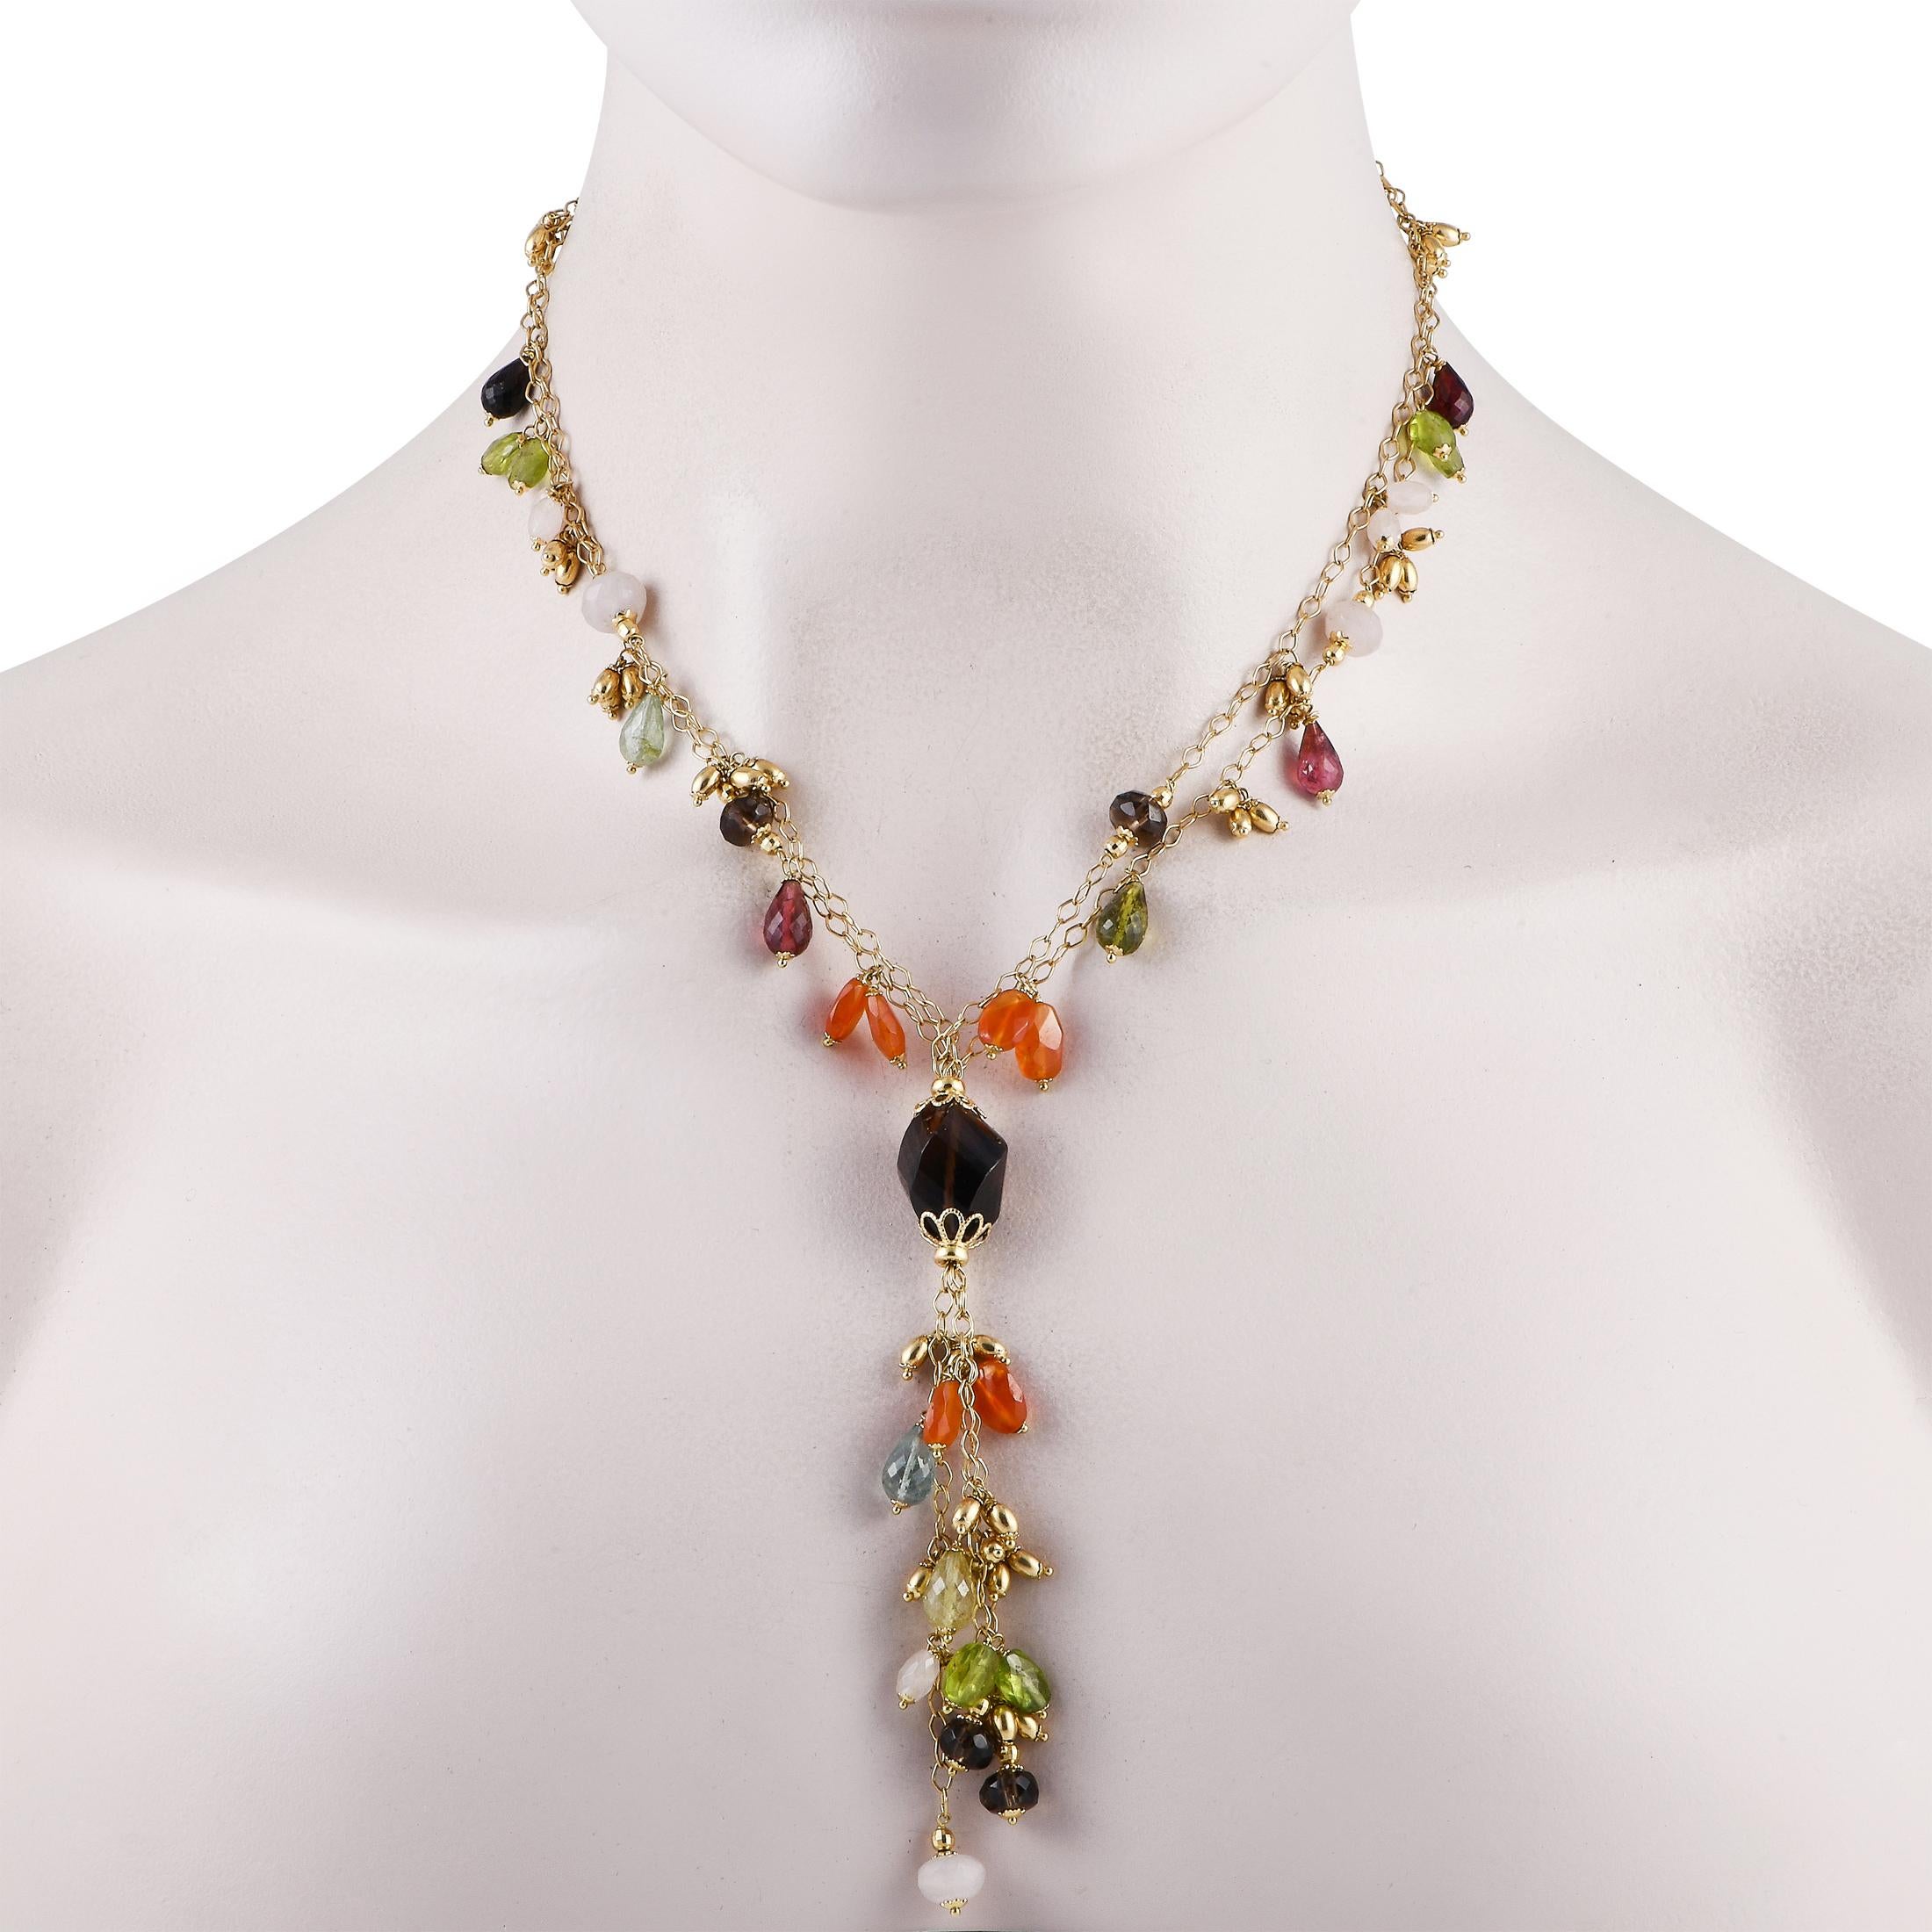 An array of colorful gemstones come together in perfect harmony on this exciting 18K Yellow Gold necklace. Designed for anyone who isn’t afraid of making a statement, this Y-shaped necklace features a 17” chain and a 4” dangling chain at the center.